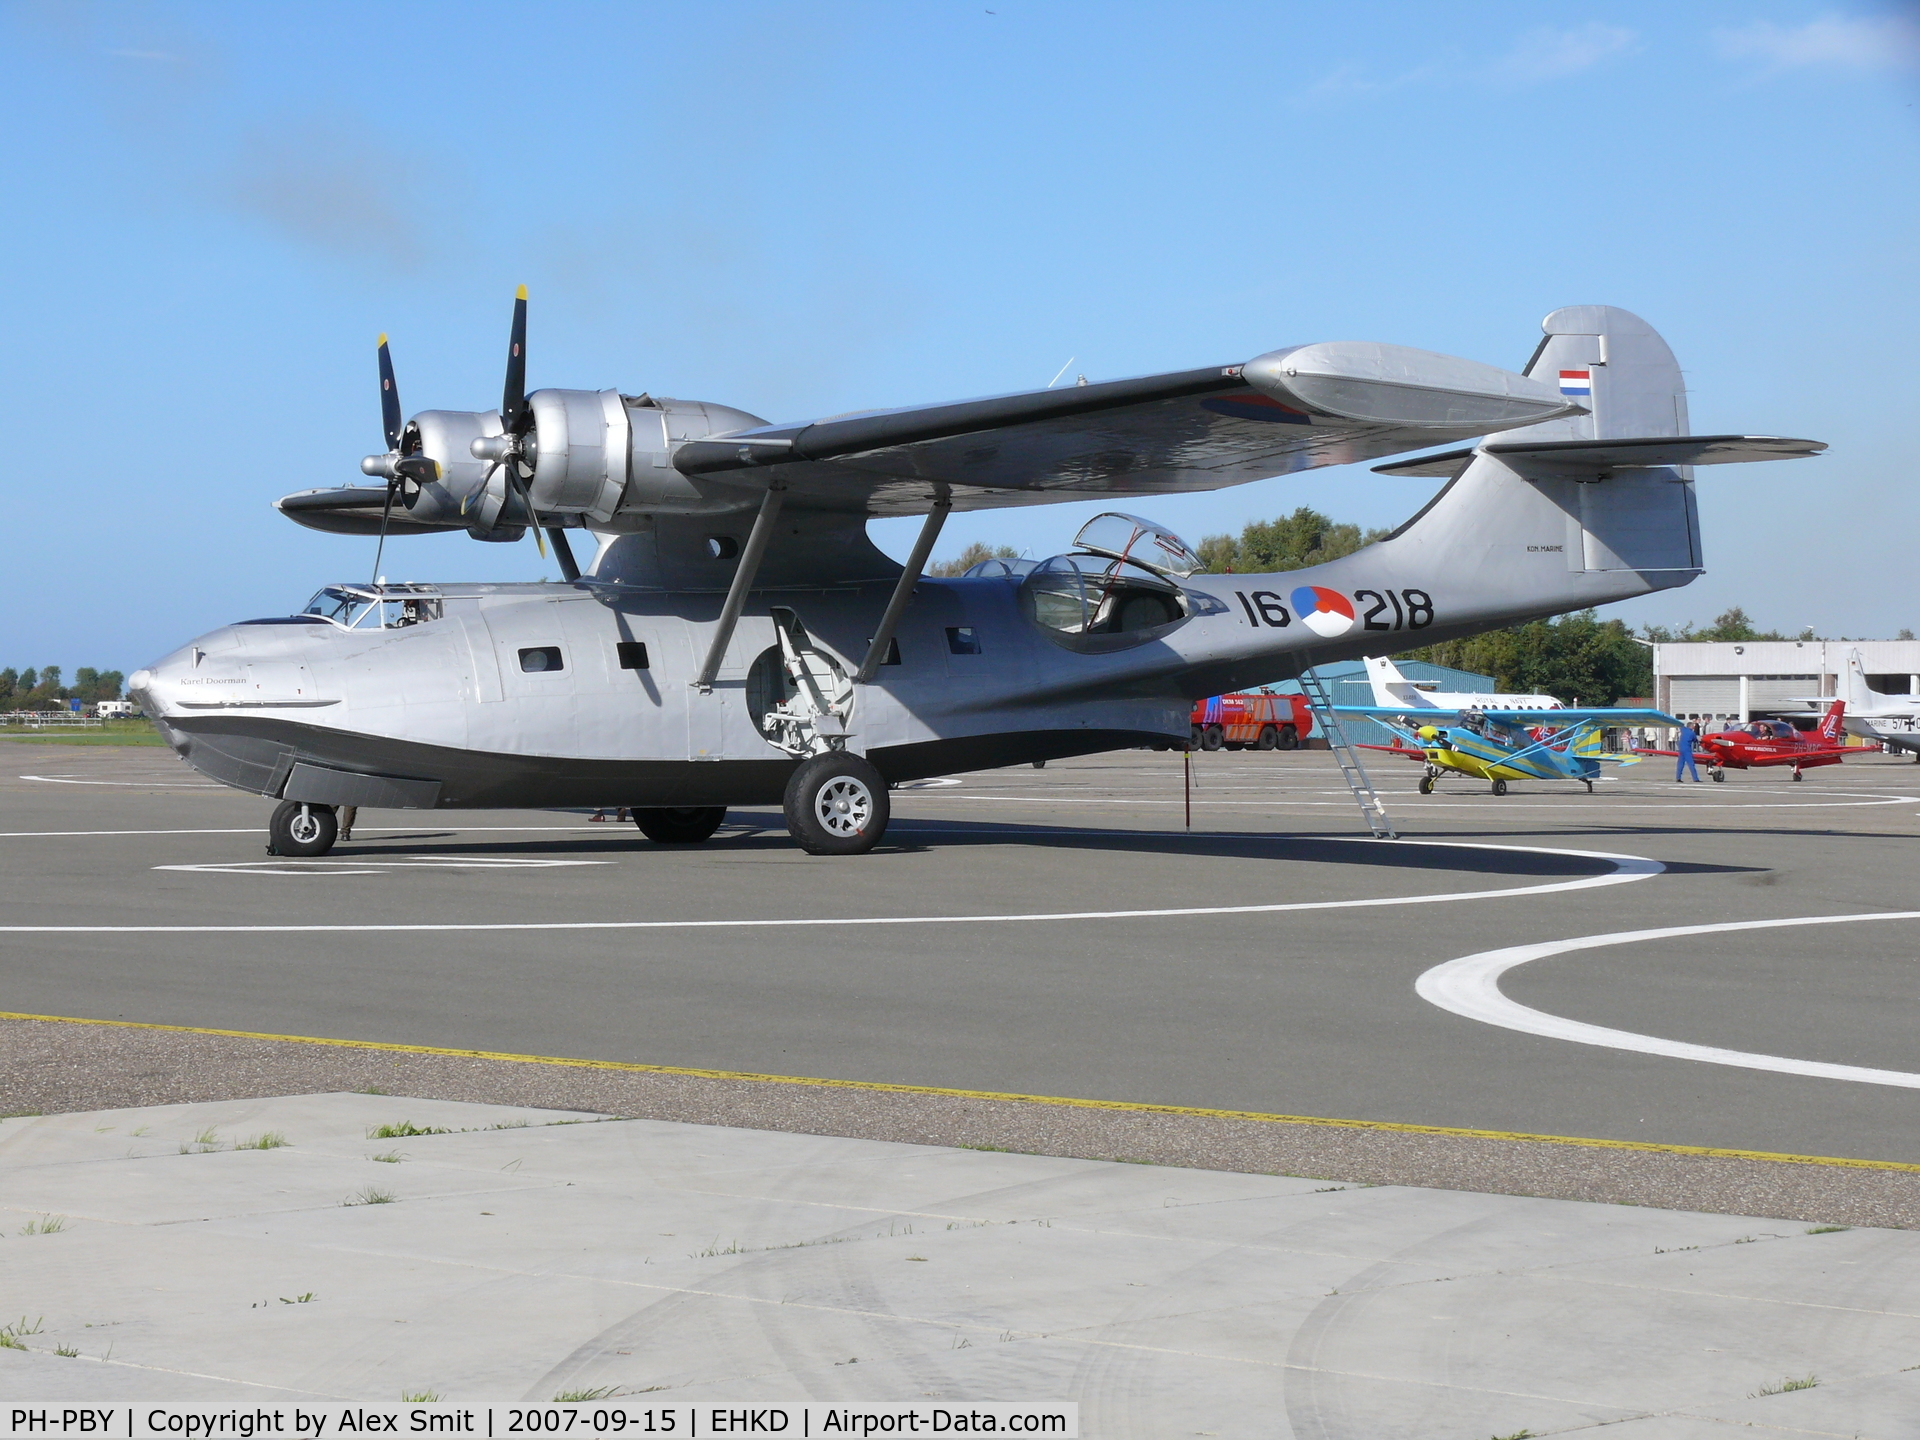 PH-PBY, 1941 Consolidated PBY-5A Catalina C/N 300, Nice looking Catalina